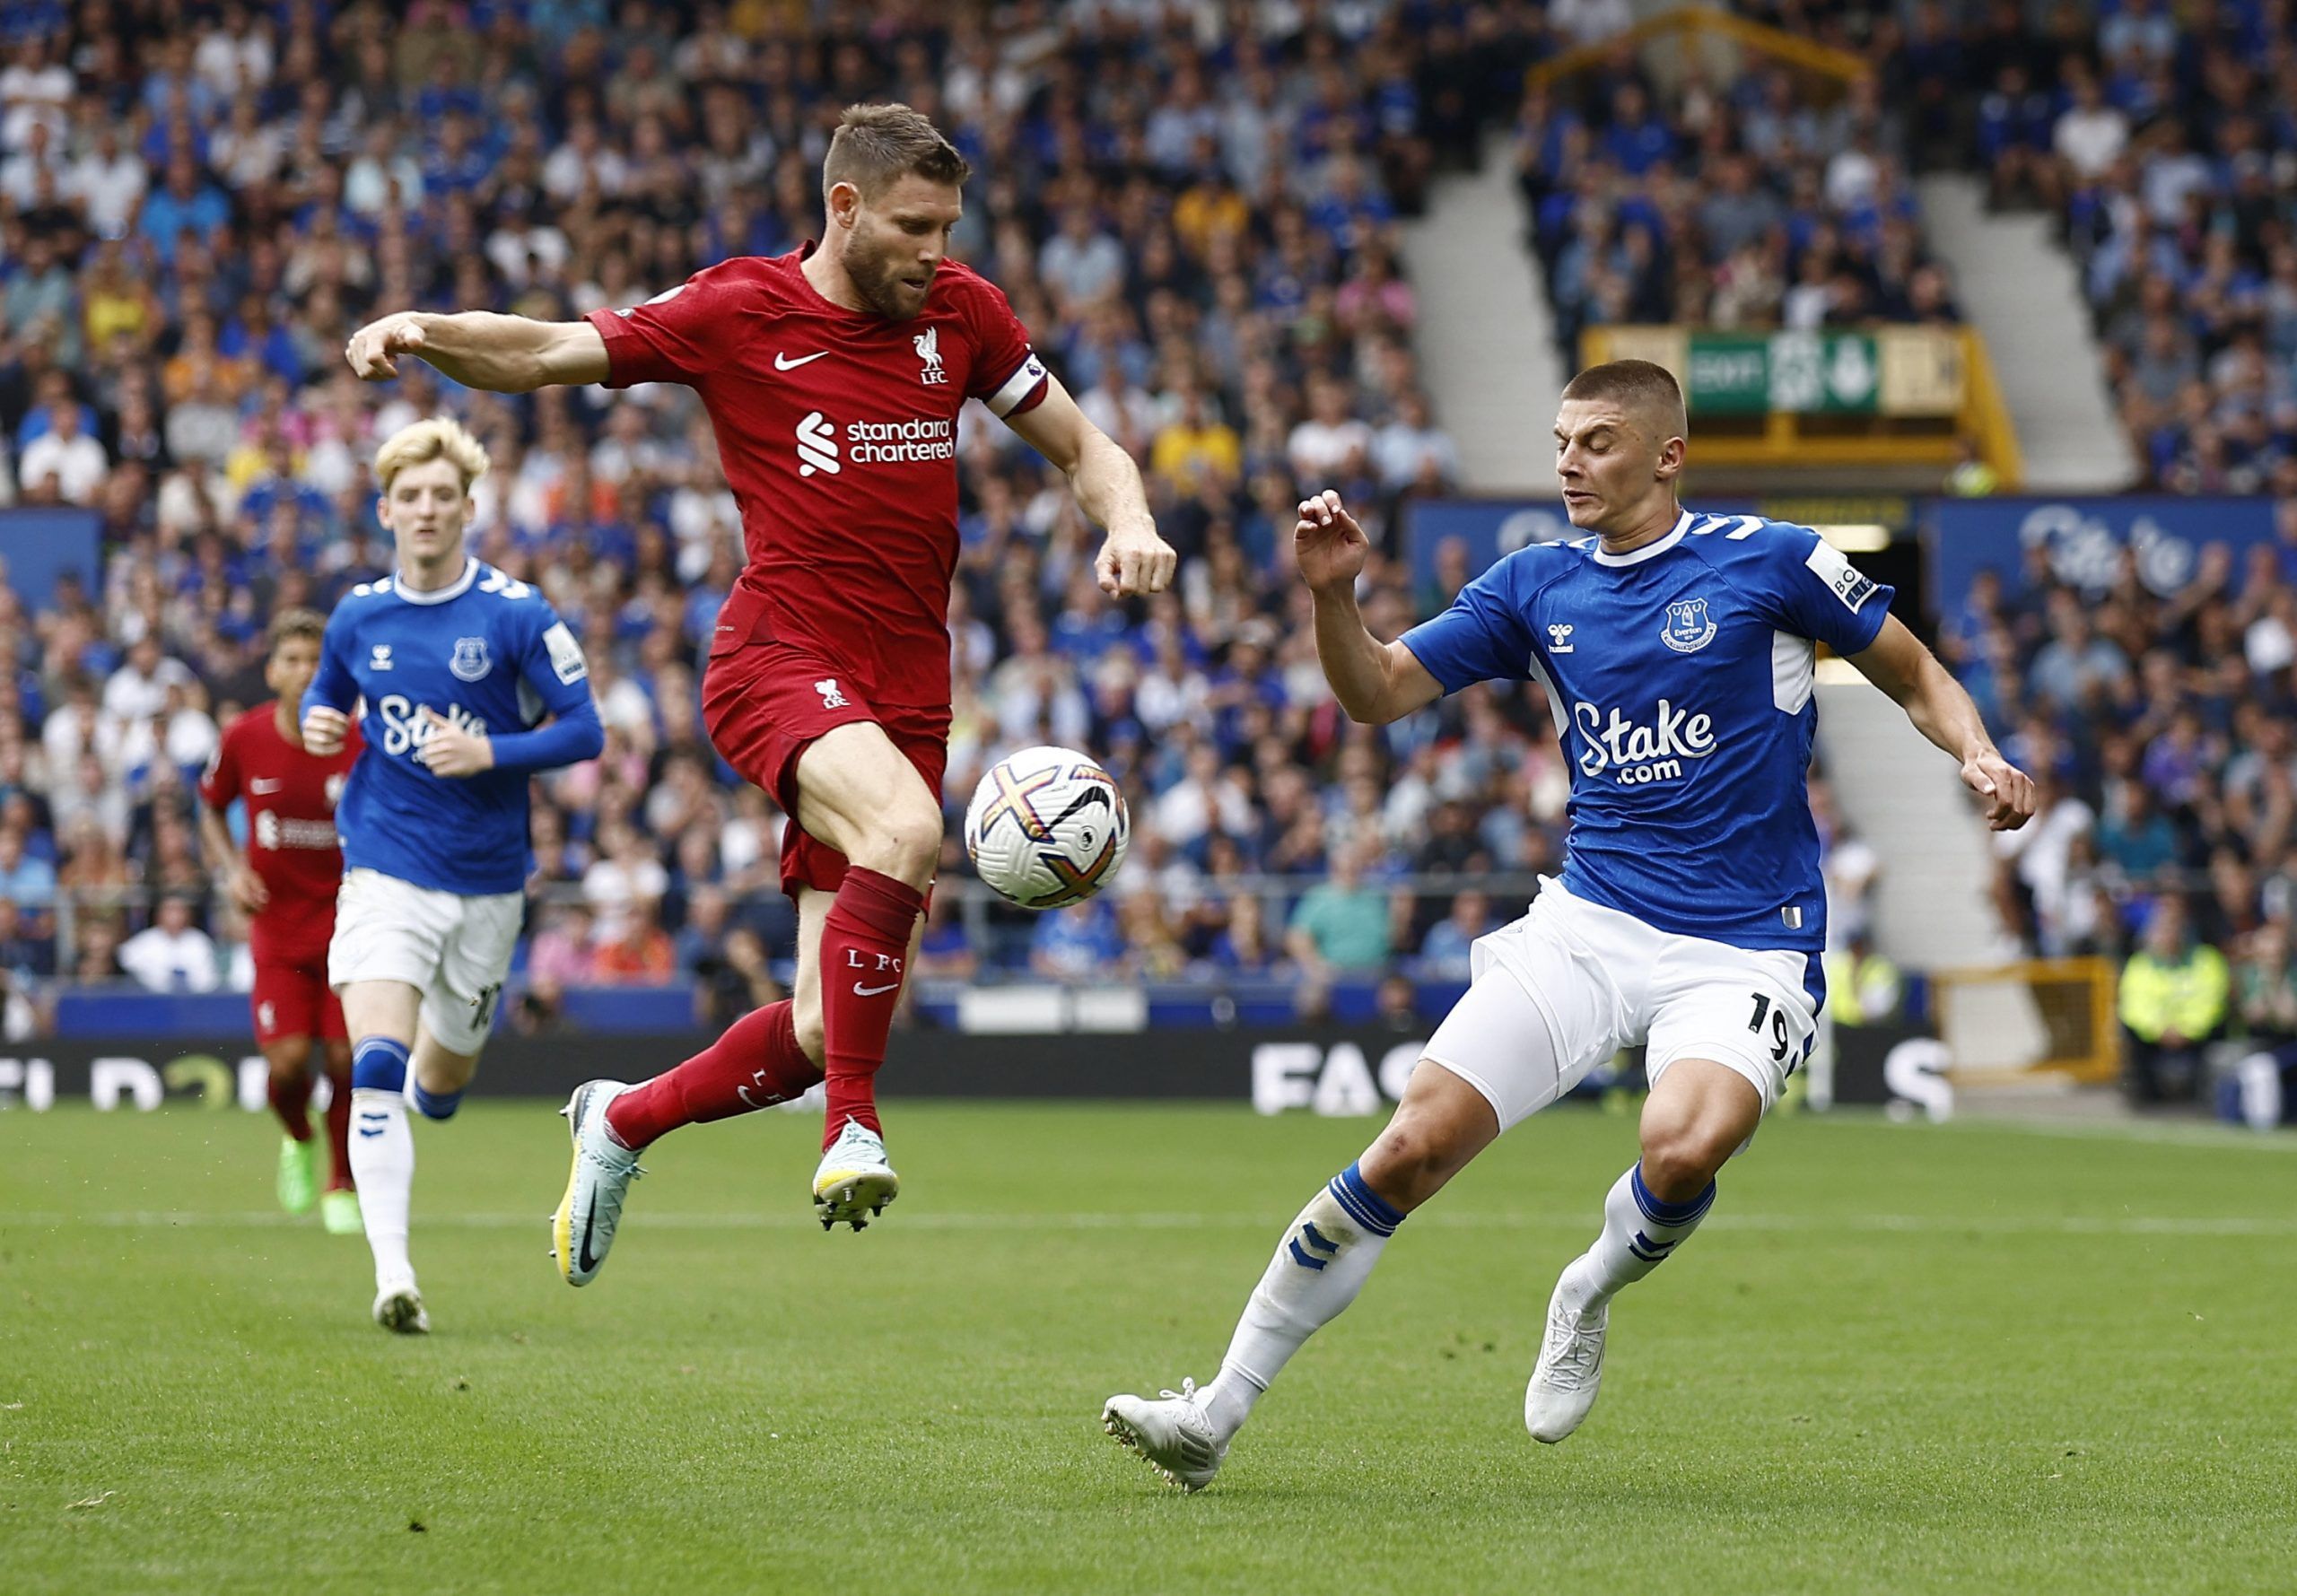 Soccer Football - Premier League - Everton v Liverpool - Goodison Park, Liverpool, Britain - September 3, 2022 Liverpool's James Milner in action with Everton's Vitaliy Mykolenko Action Images via Reuters/Jason Cairnduff EDITORIAL USE ONLY. No use with unauthorized audio, video, data, fixture lists, club/league logos or 'live' services. Online in-match use limited to 75 images, no video emulation. No use in betting, games or single club /league/player publications.  Please contact your account r